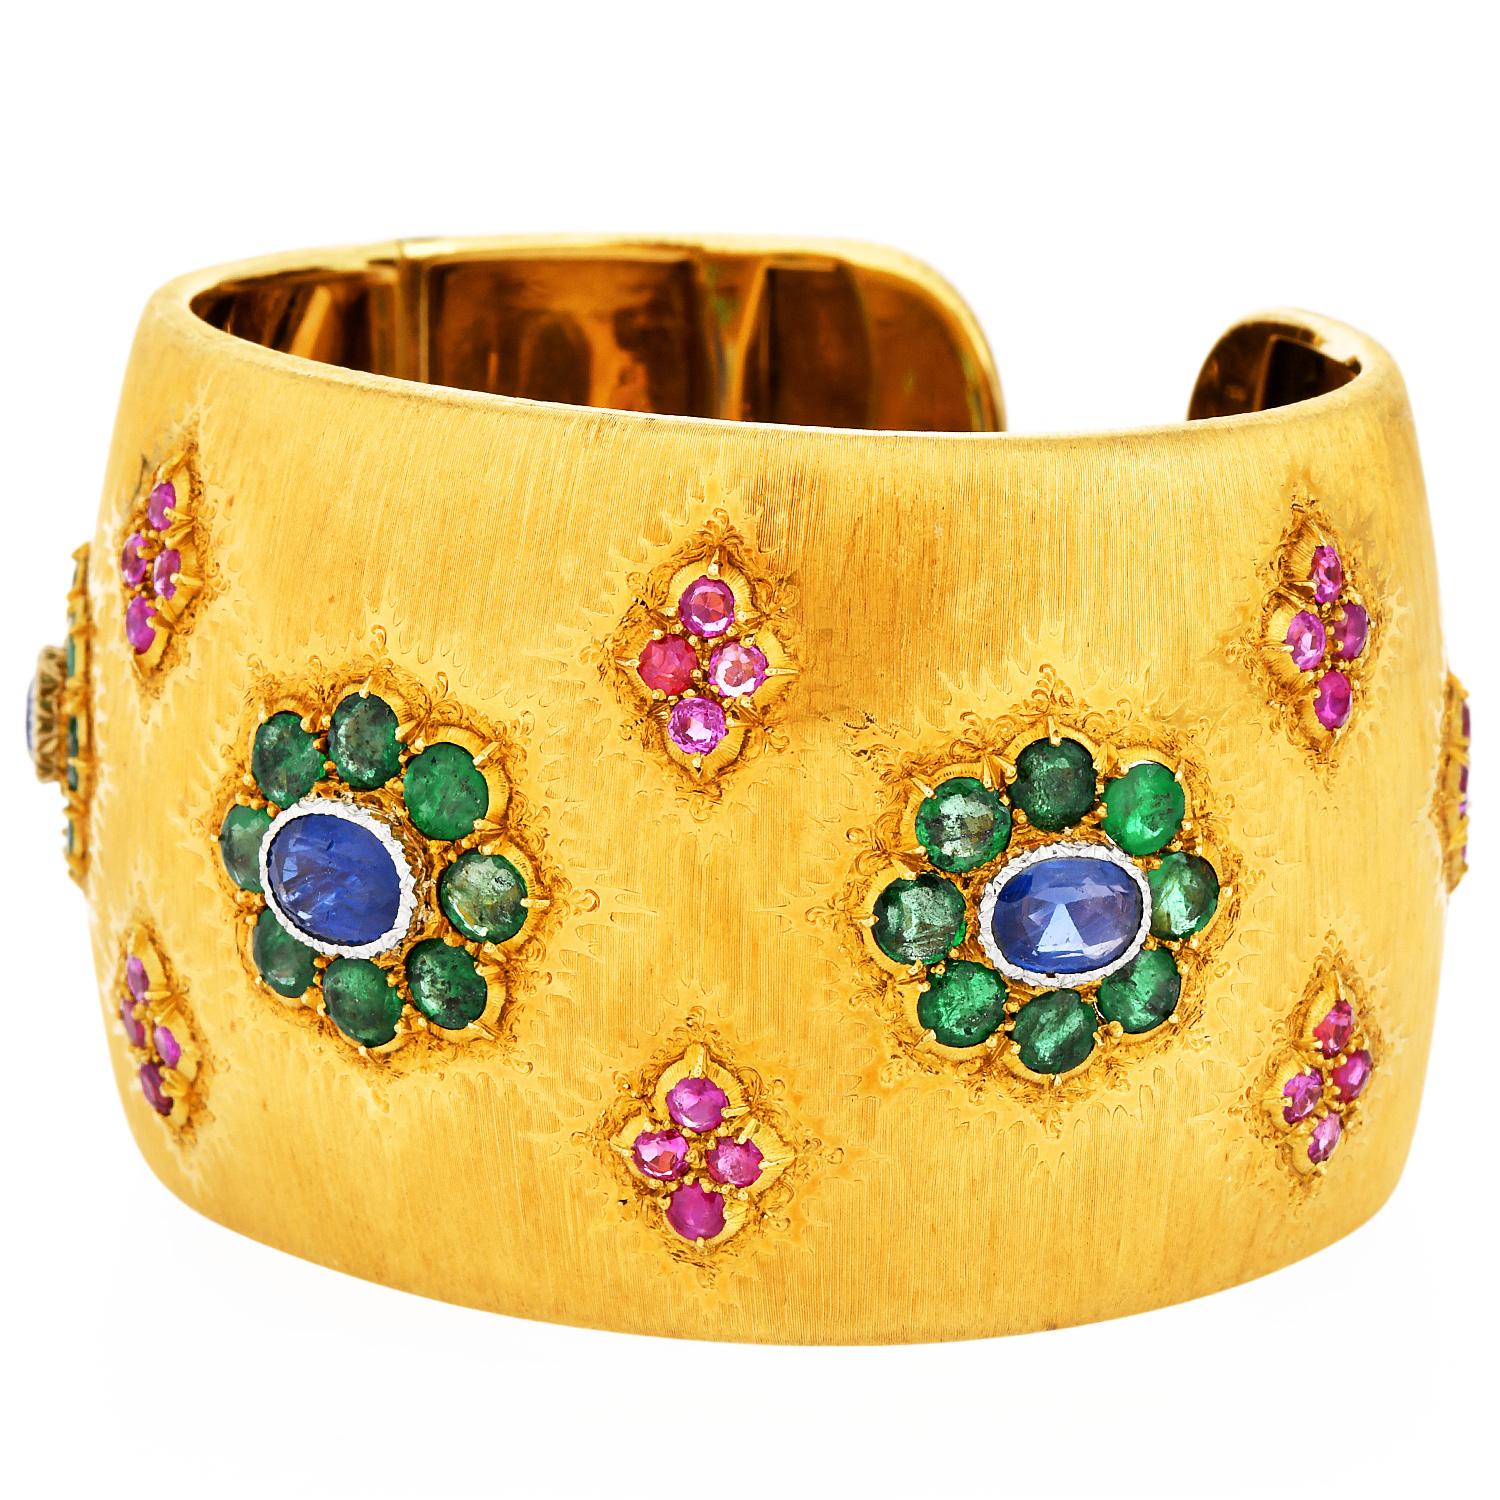 Presenting a rare wide cuff bracelet from Buccellati. It is forged in 18K yellow gold with satin finish work popular design of the Mario Collection from the house of Buccellati.

The bracelet is decorated with precious stones Rubies, Emeralds, and